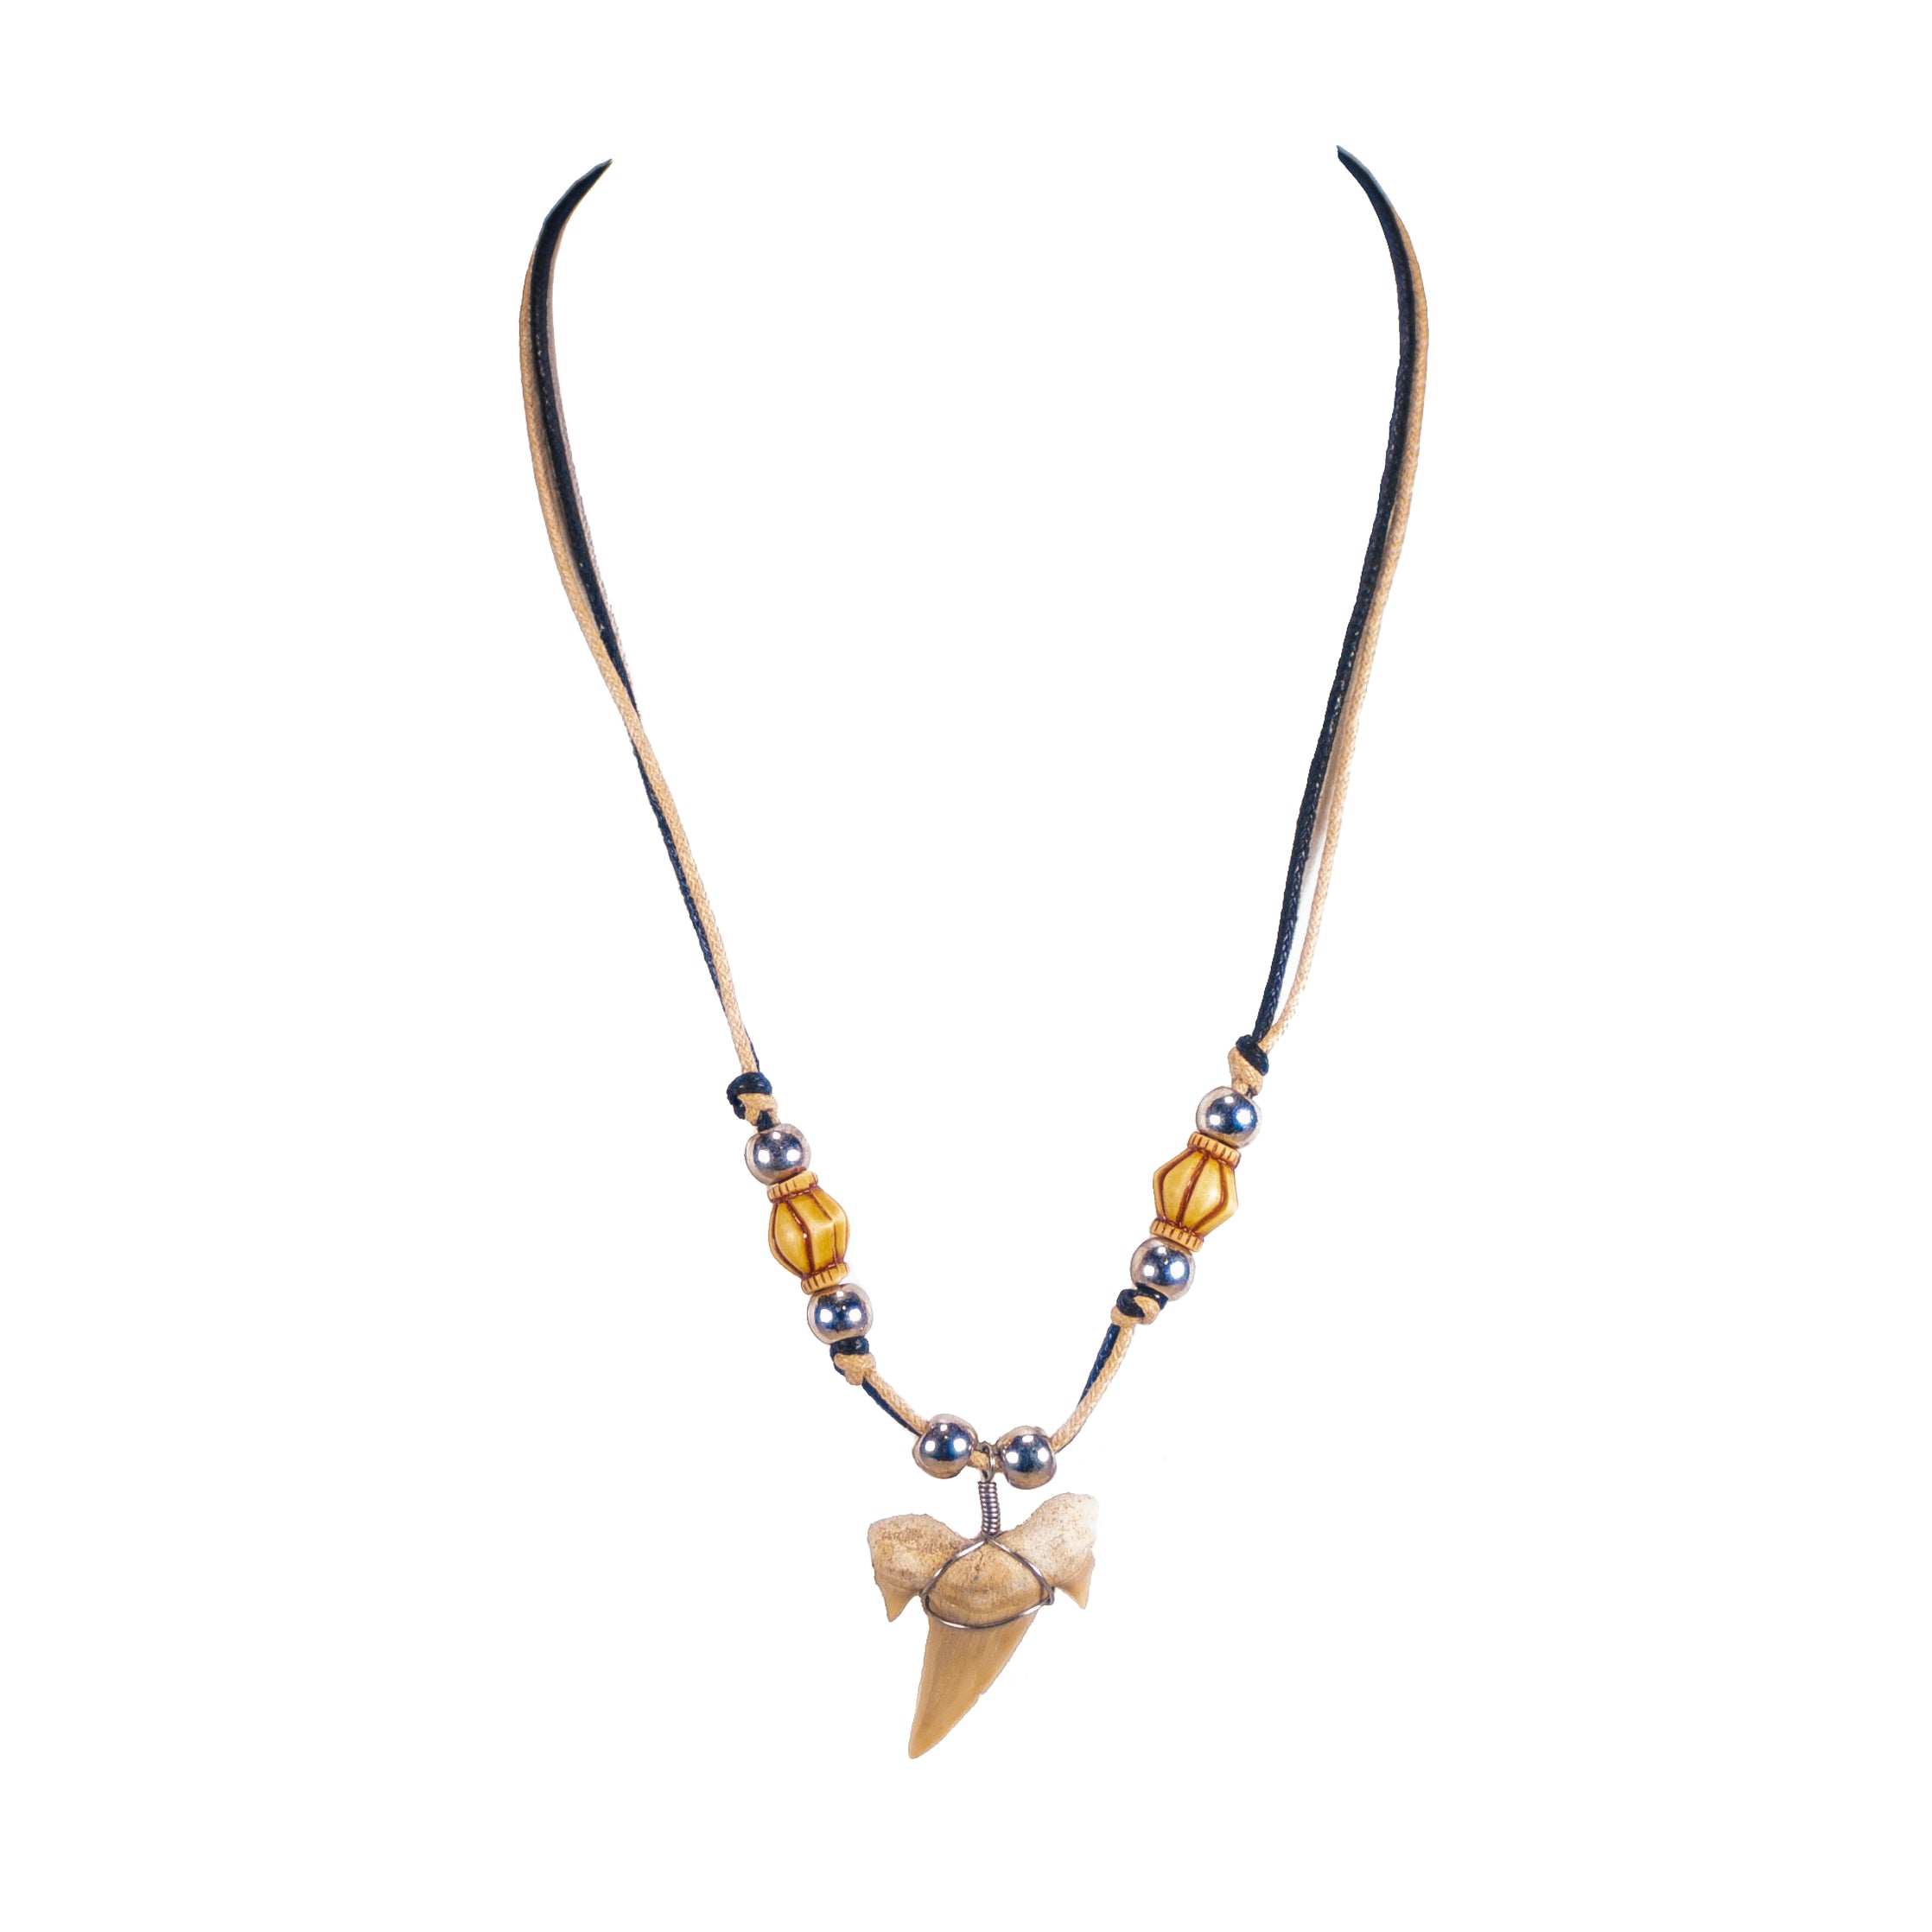 1¼"+ Shark Tooth Pendant on Double Cord Necklace with Tribal Beads